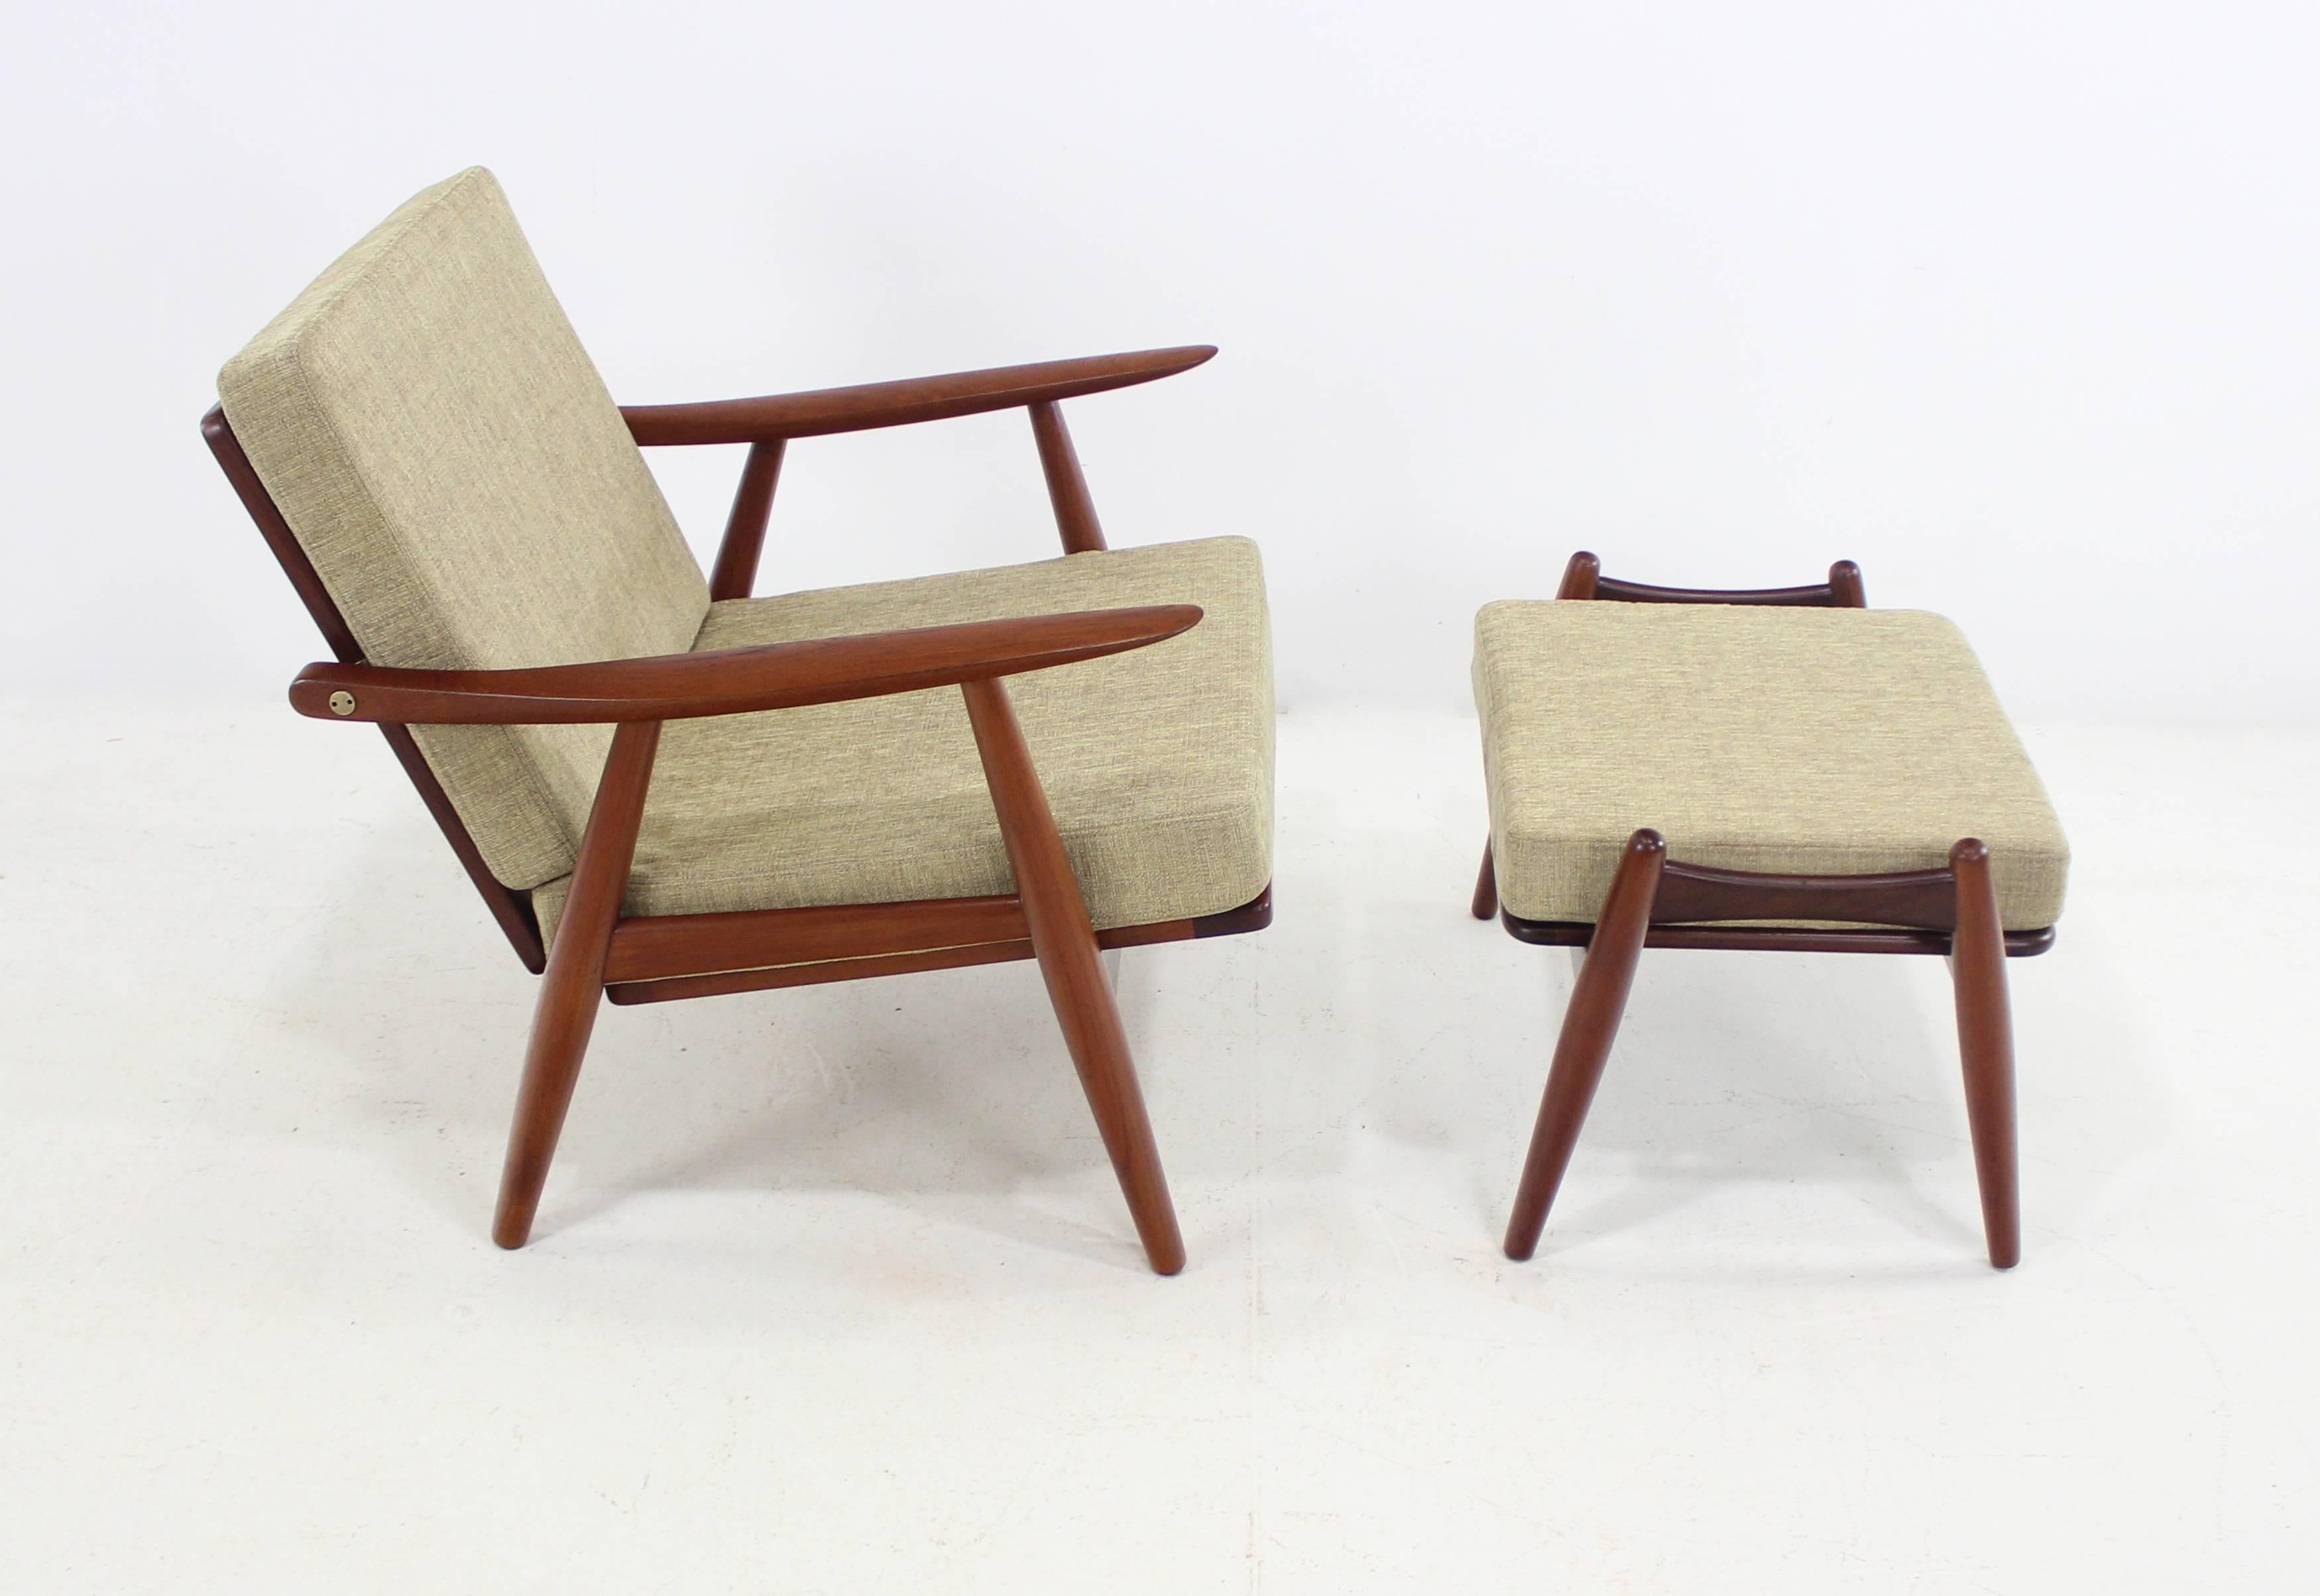 Two Danish modern armchairs and one ottoman designed by Hans Wegner.
GETAMA Getsted, maker. Model GE-70.
Teak frames with brass hardware.
Newly upholstered in highest quality period fabric.
Ottoman measures 15.5